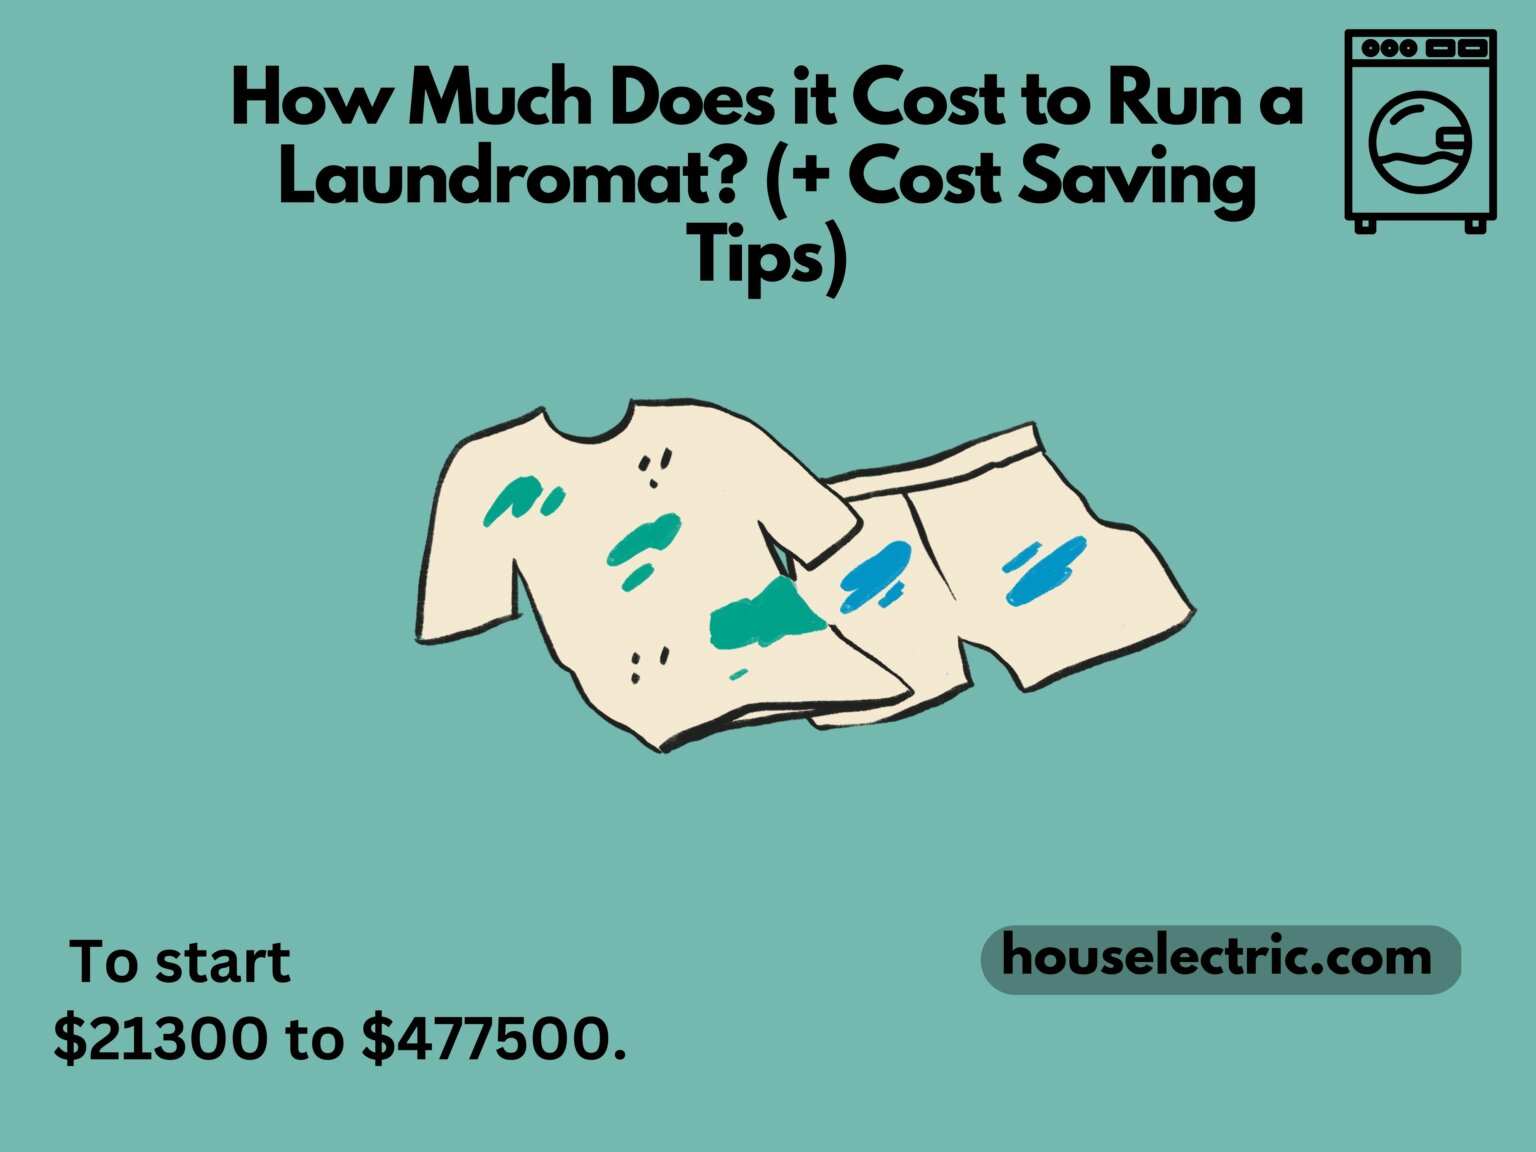 how-much-does-it-cost-to-run-a-laundromat-cost-saving-tips